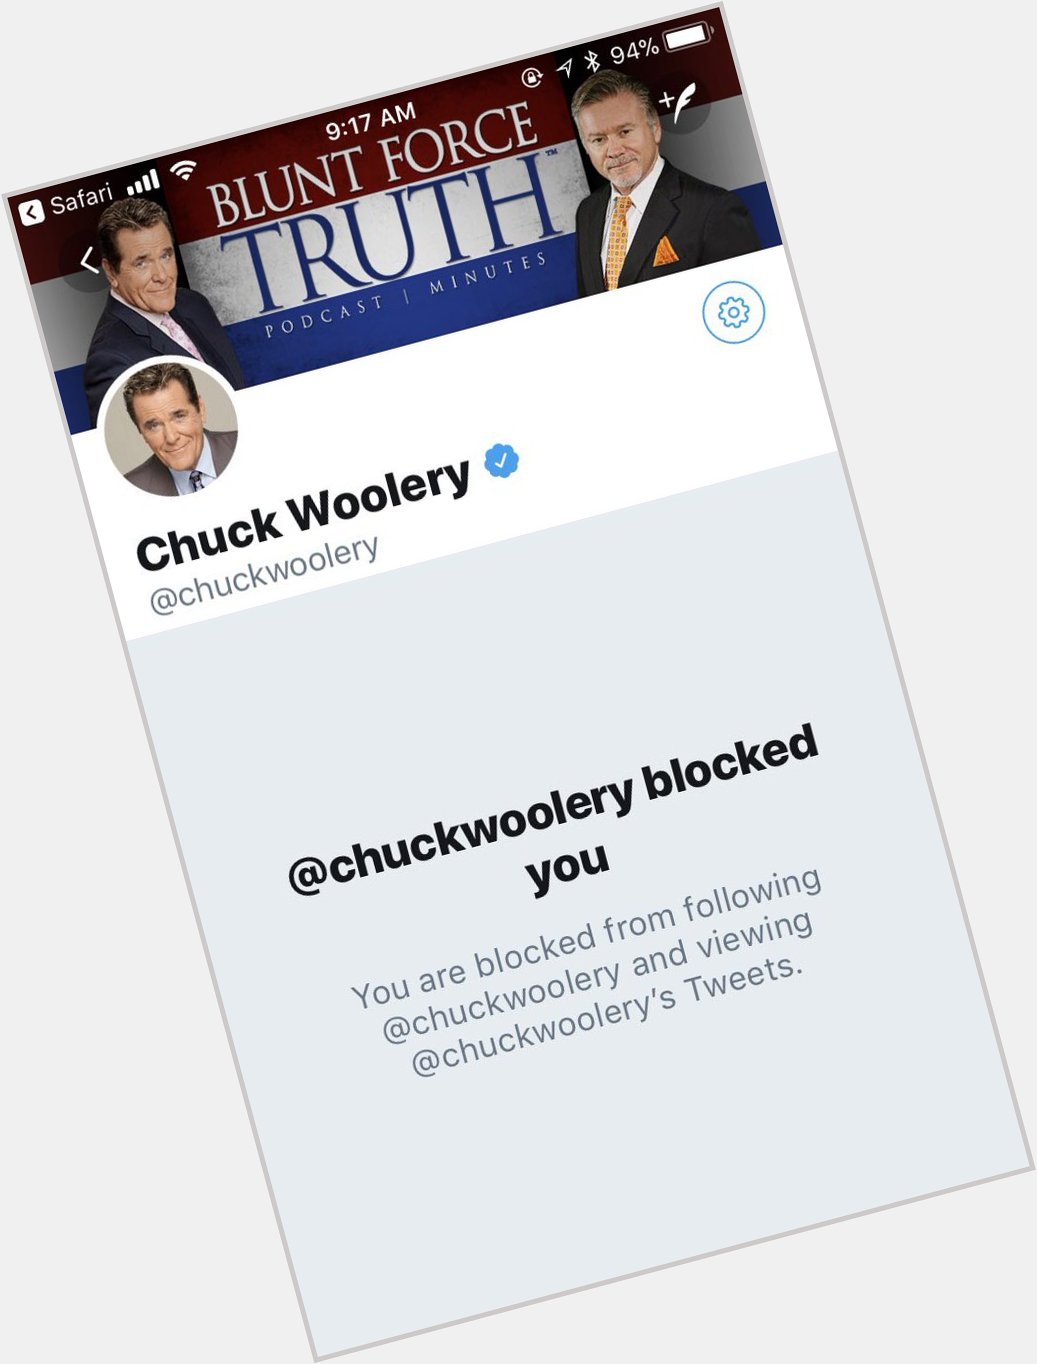 Tomorrow is Chuck Woolery s birthday! Will someone please wish him a happy one for me? I can t! 